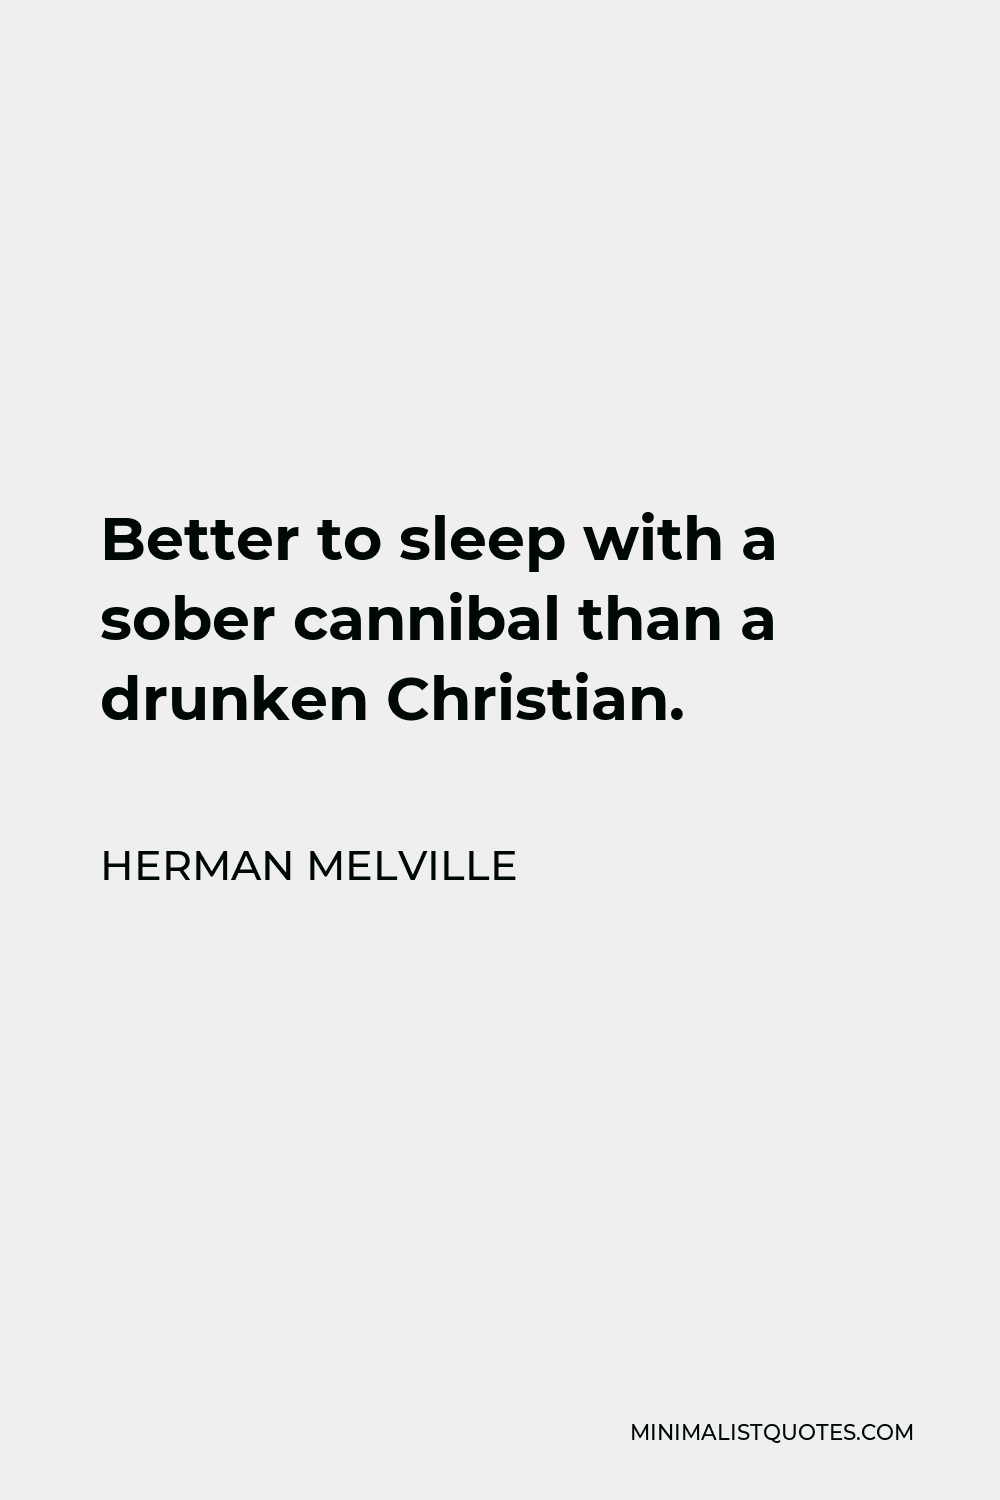 Herman Melville Quote - Better to sleep with a sober cannibal than a drunken Christian.